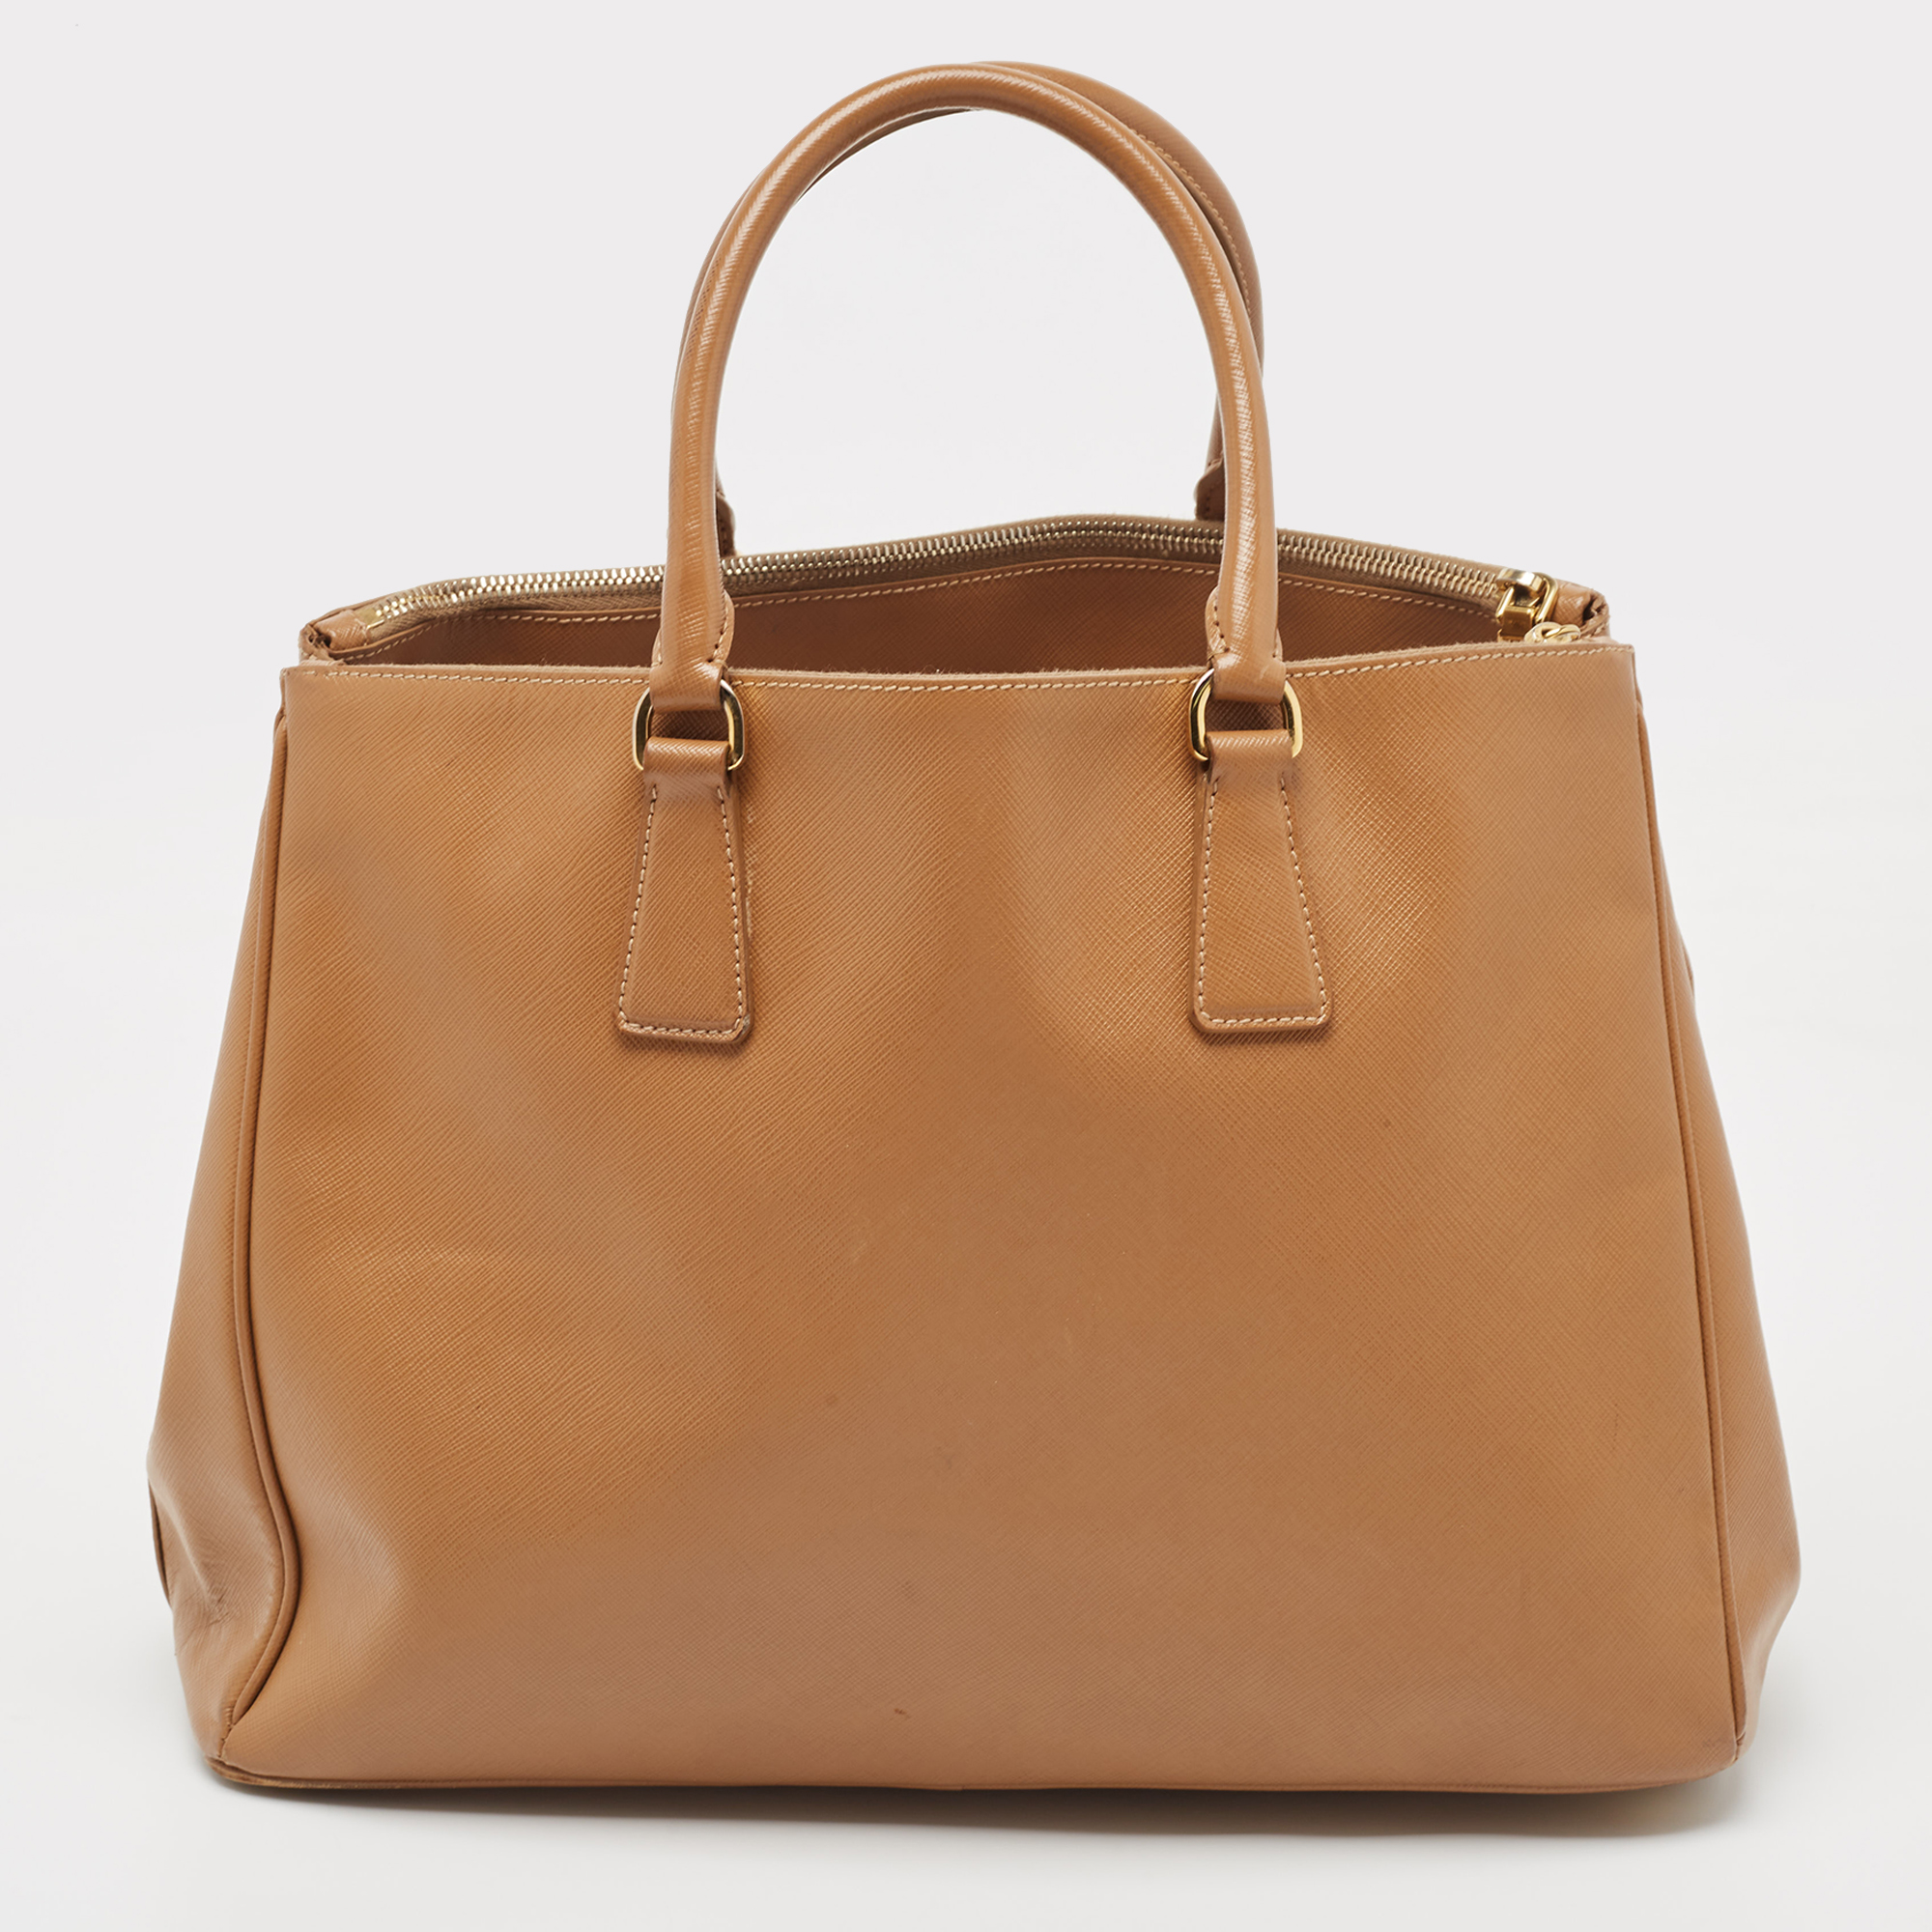 Prada Brown Saffiano Leather Large Double Zip Tote